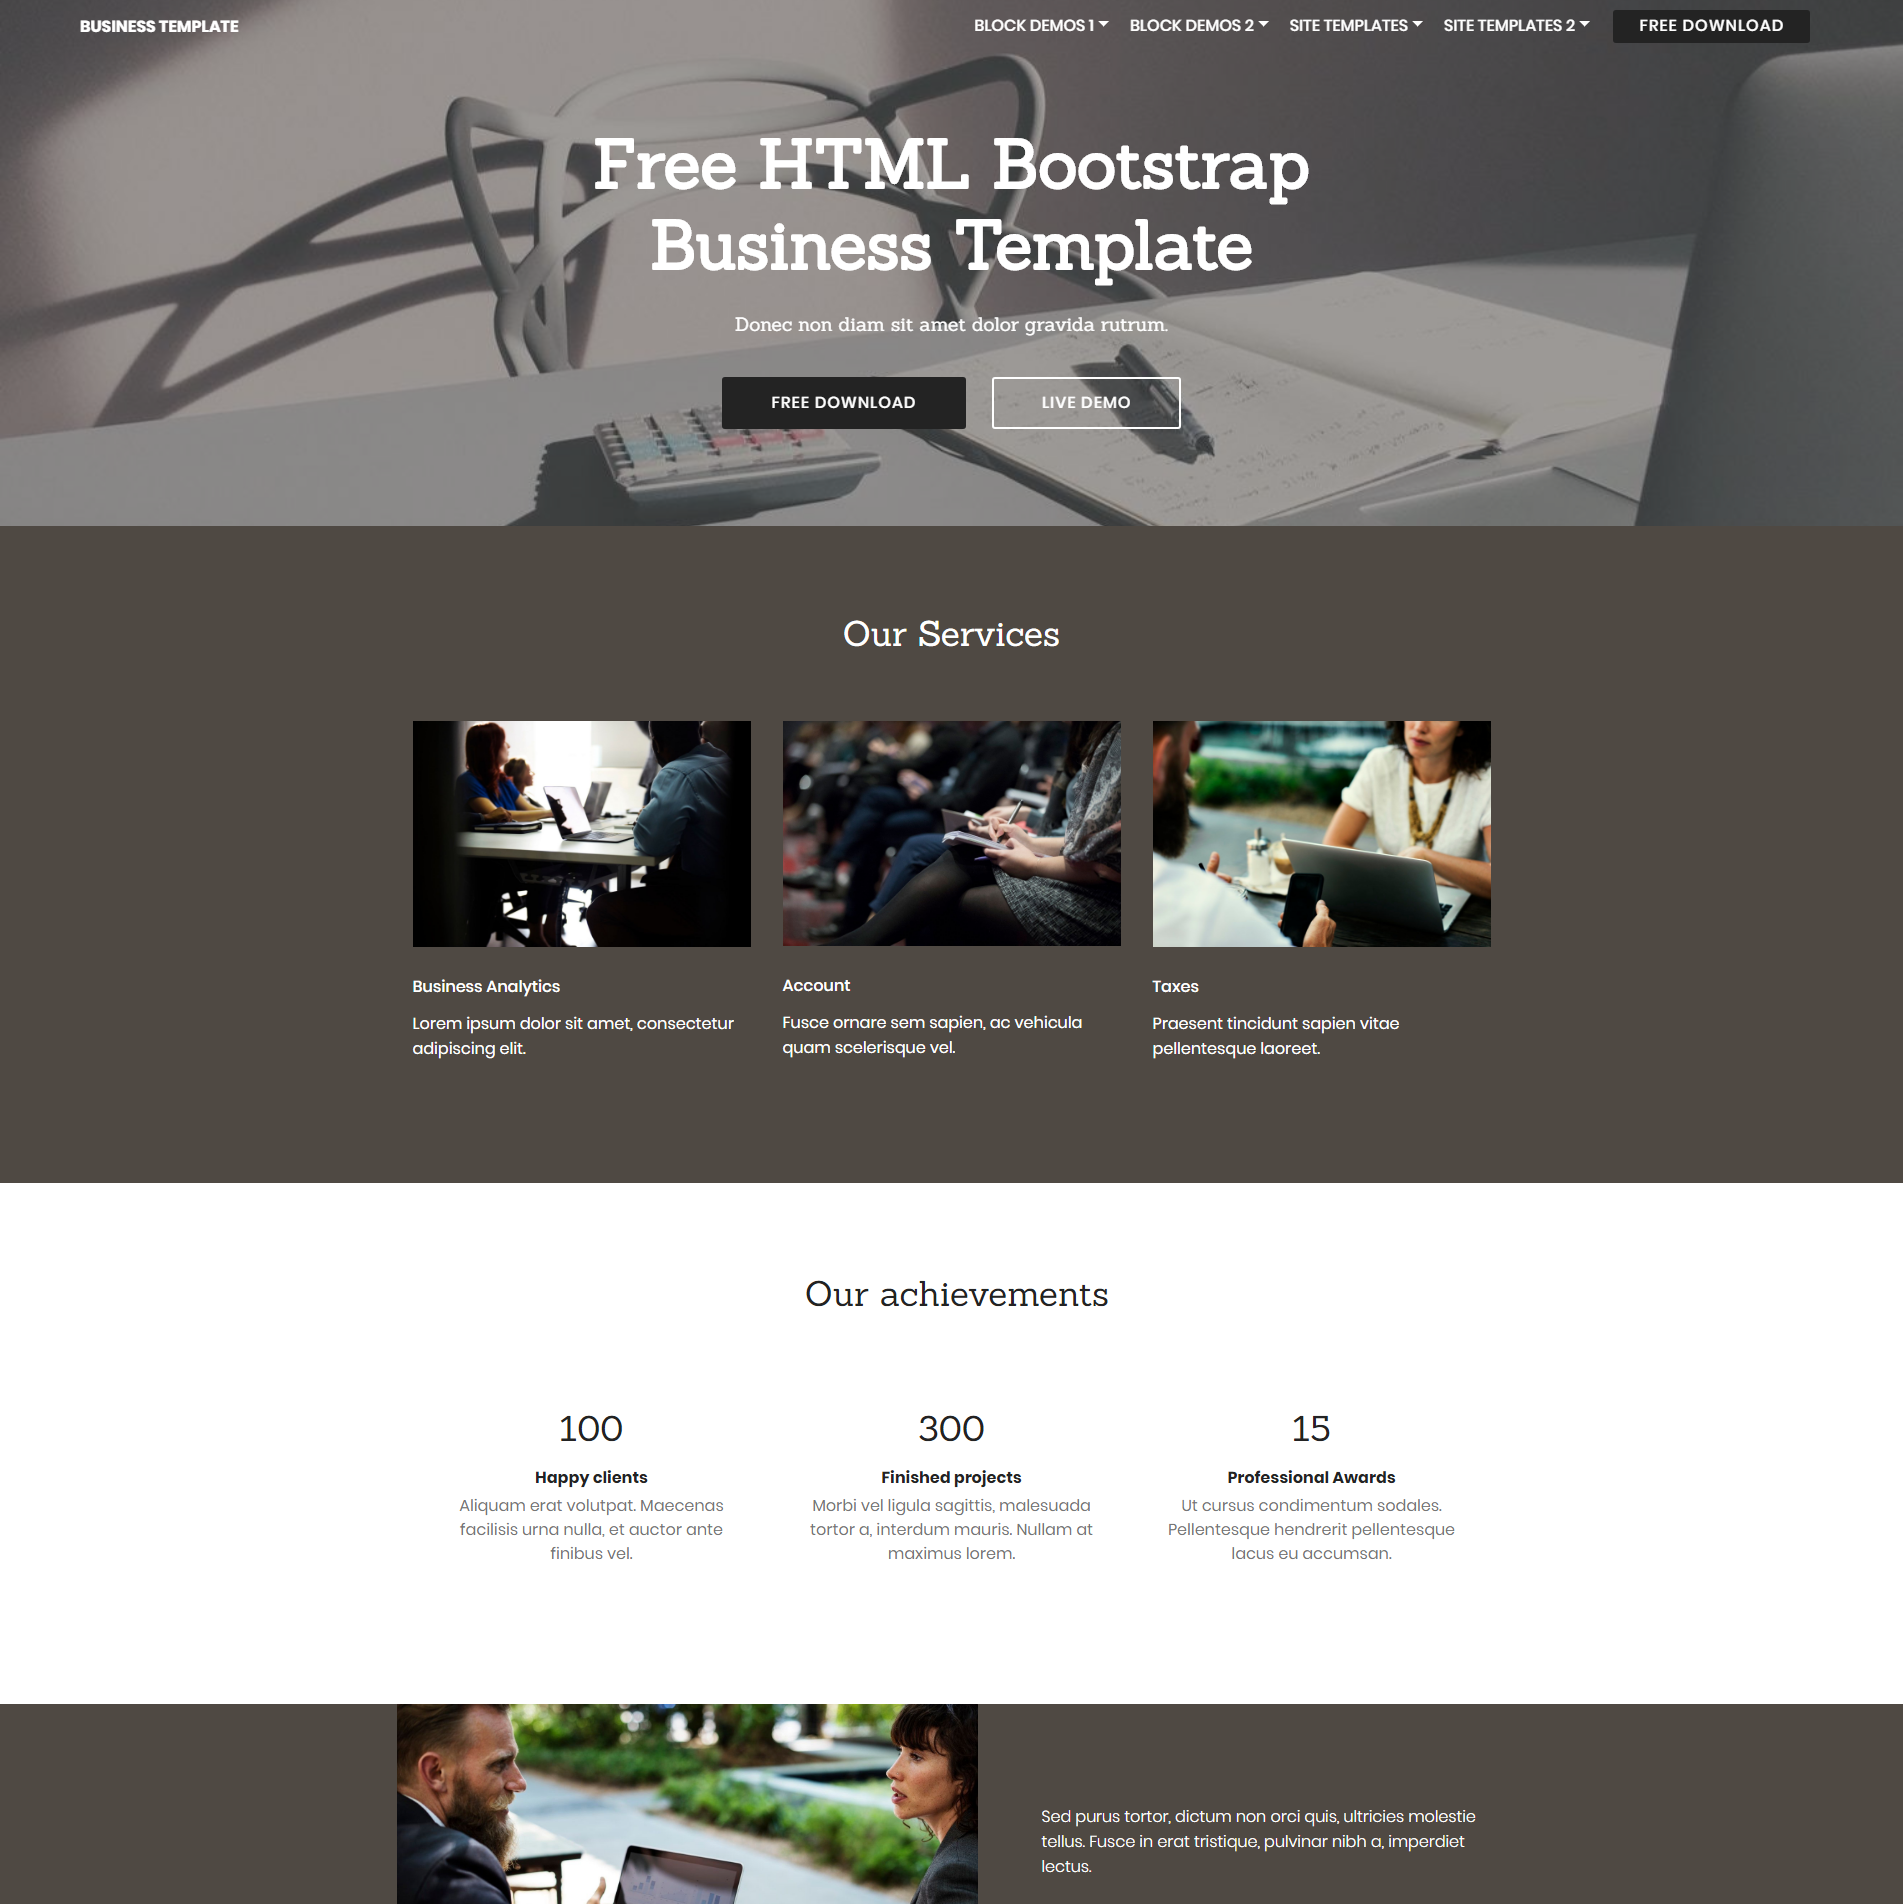 HTML5 Bootstrap Business Templates